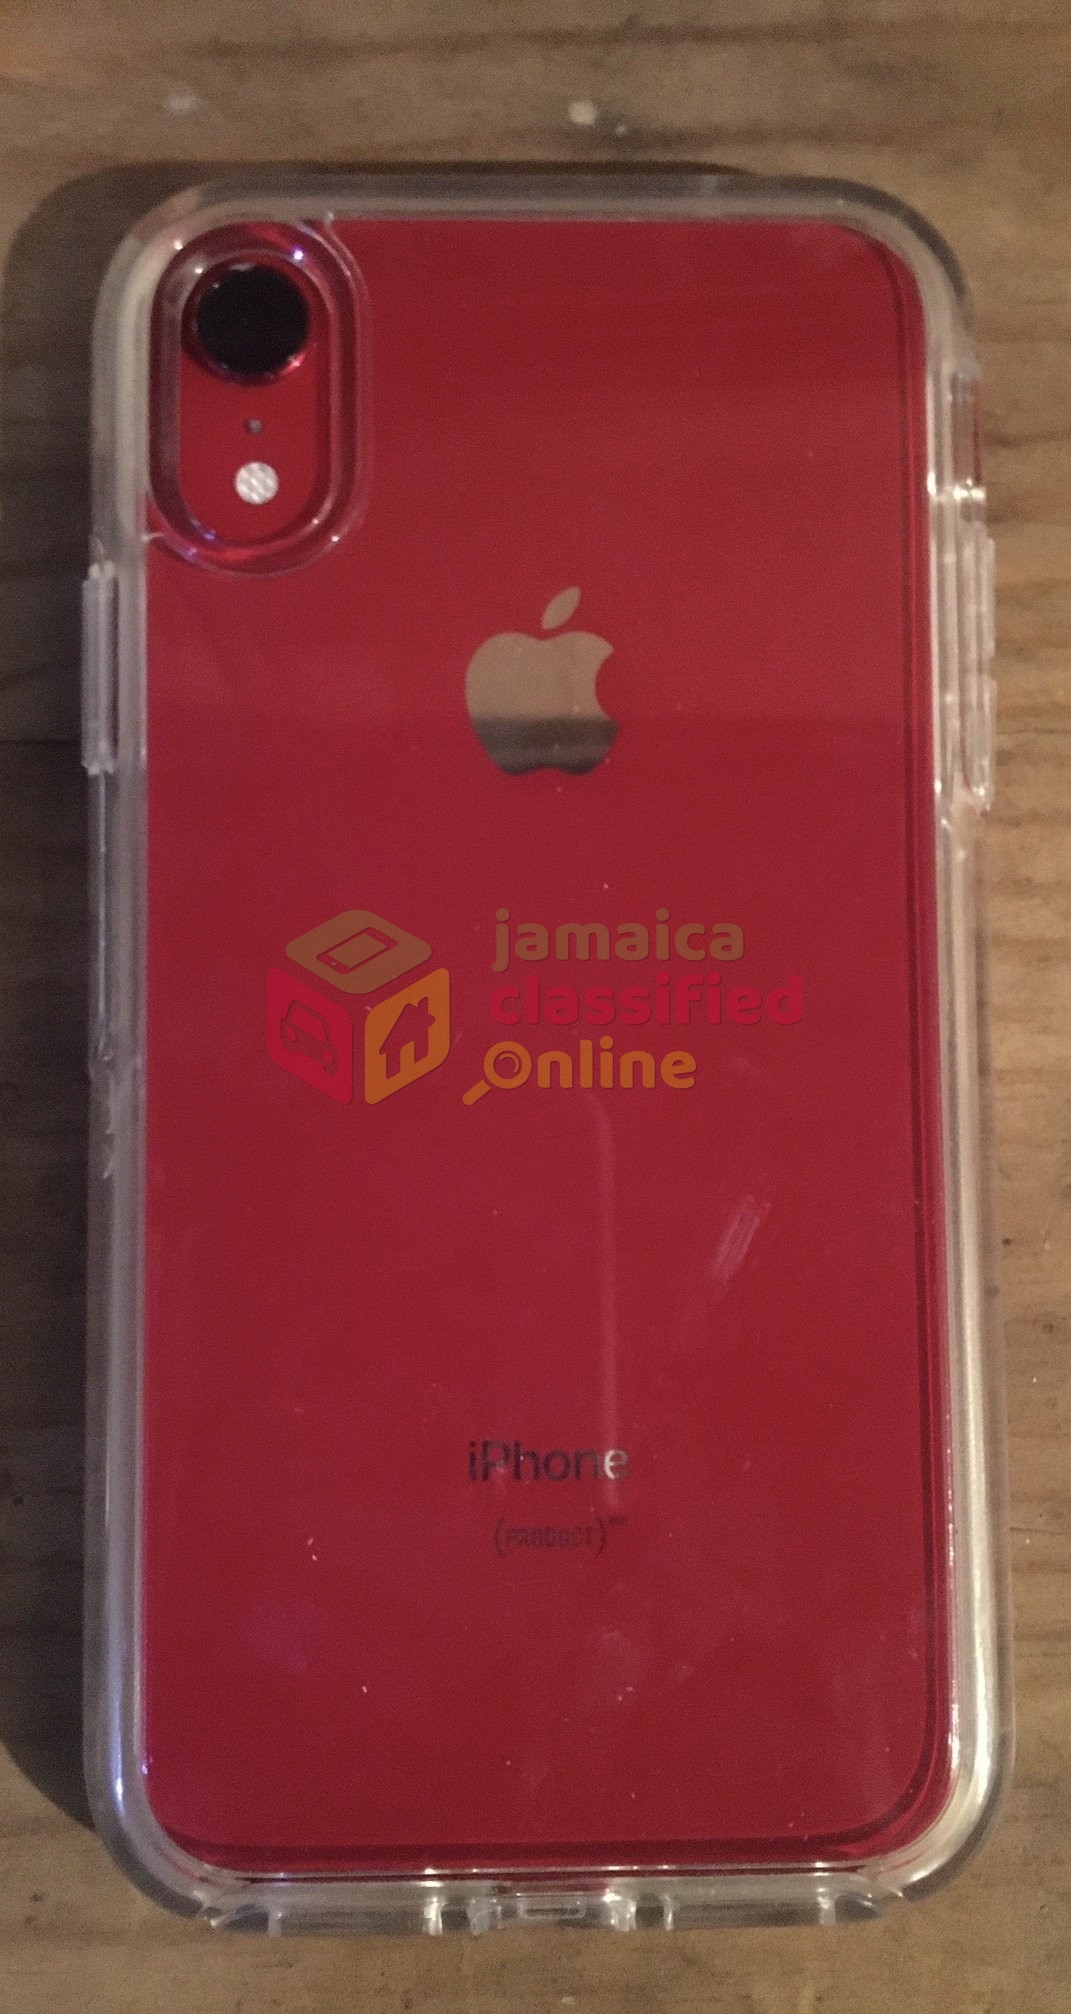 IPhone XR Product Red 64GB for sale in Molynes Berts Auto Kingston St